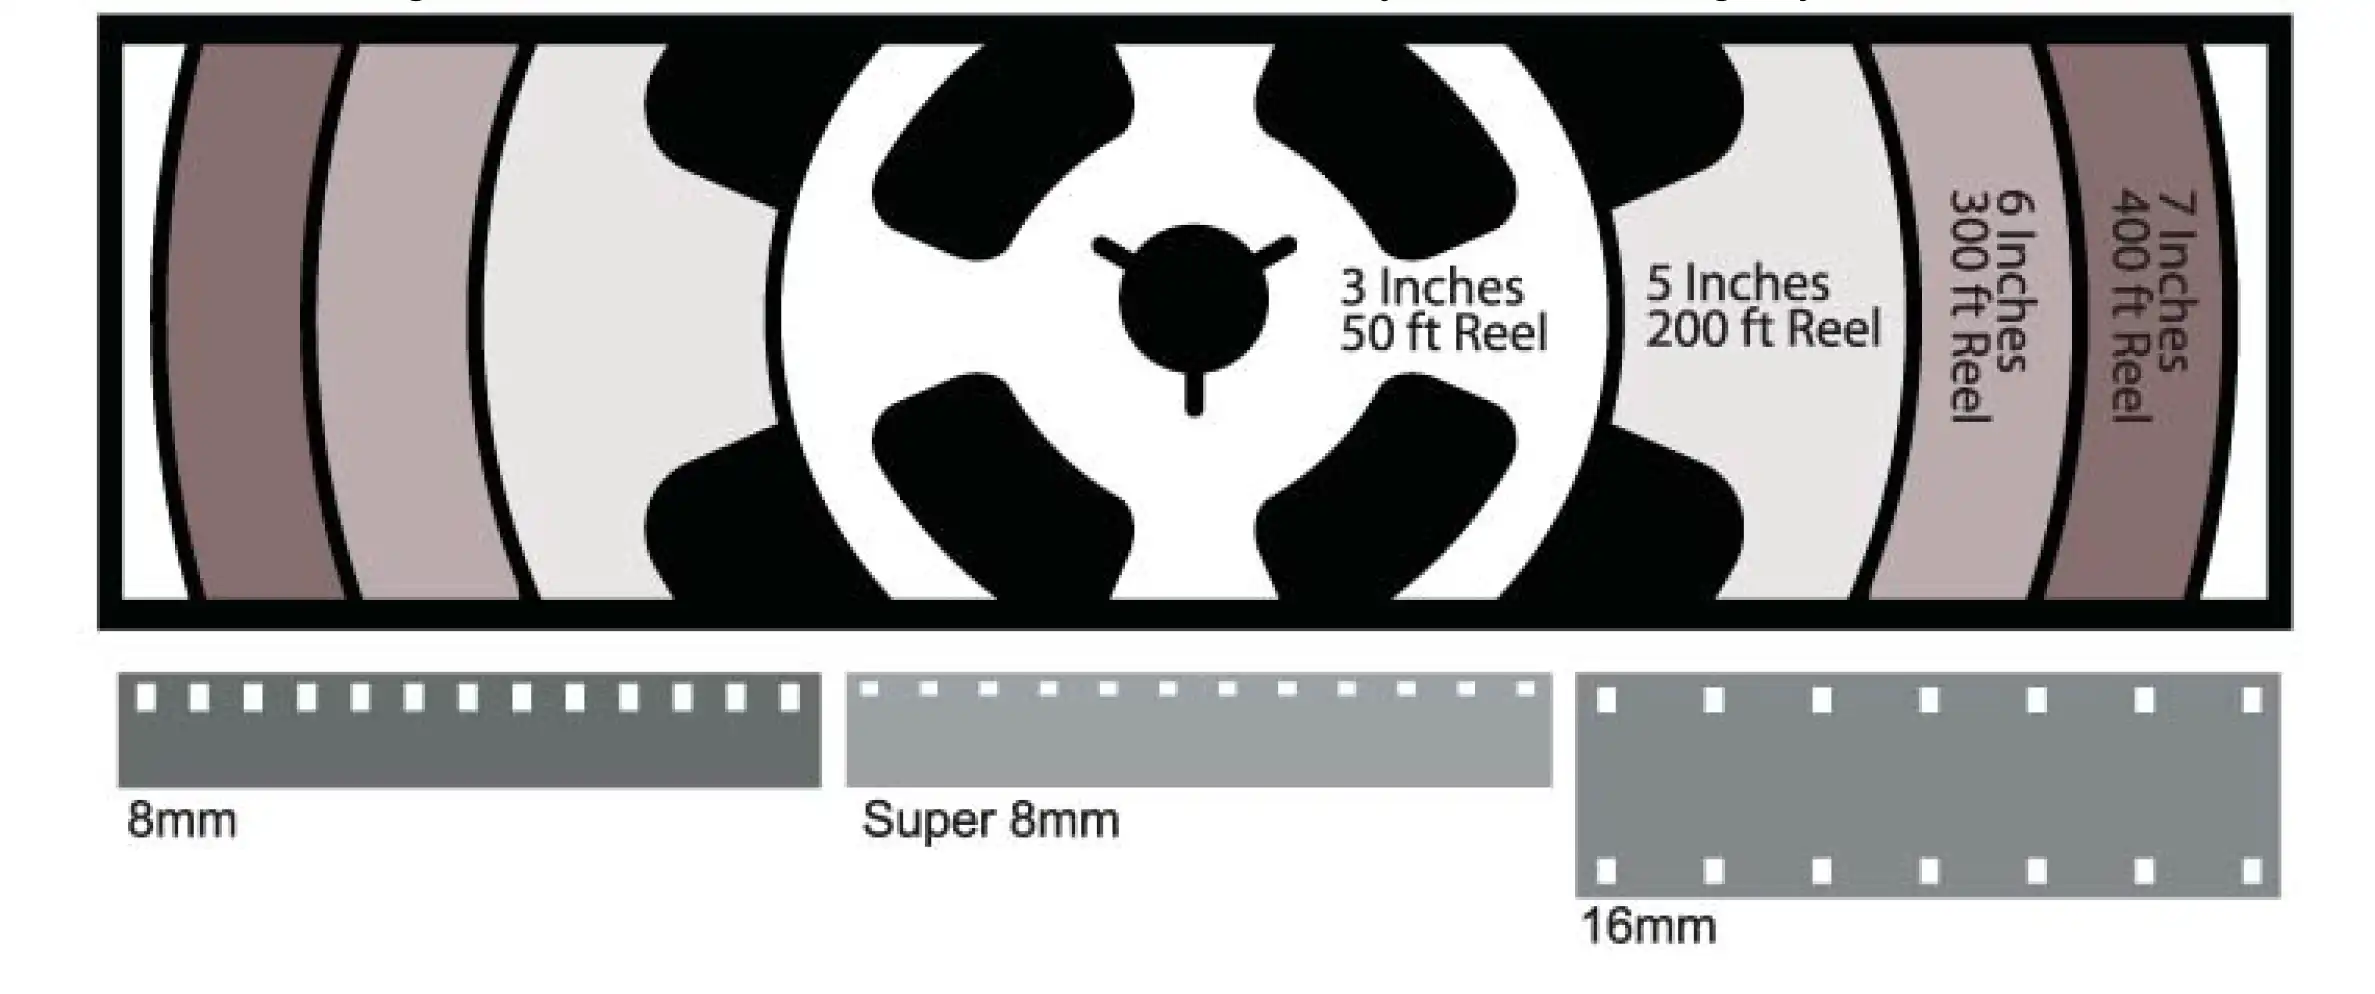 Film reel sizing guide